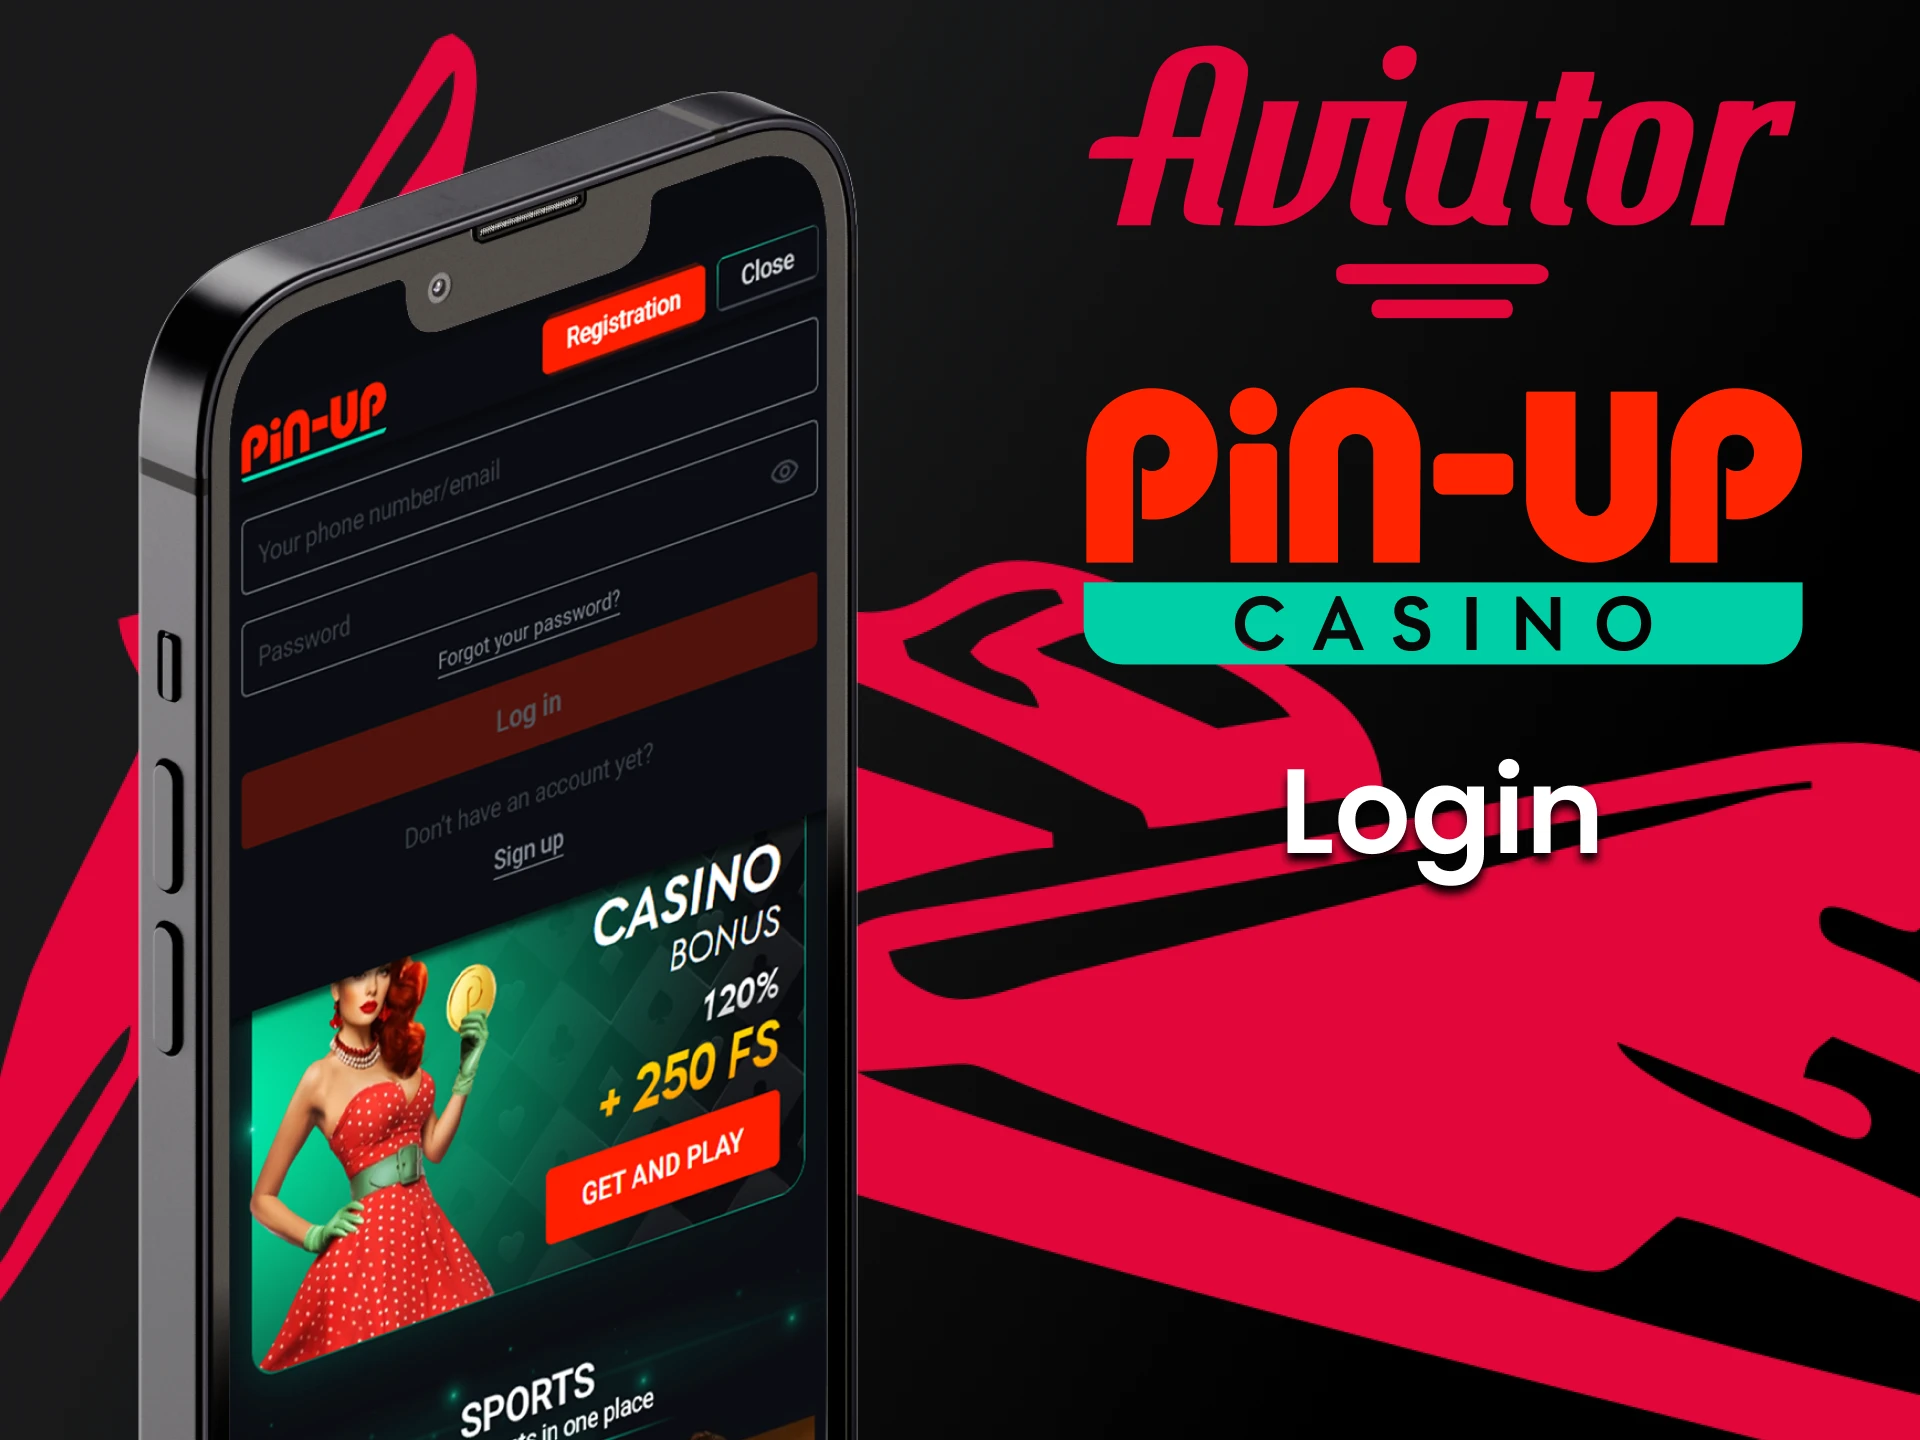 Sign in to your Pin Up account to play Aviator.